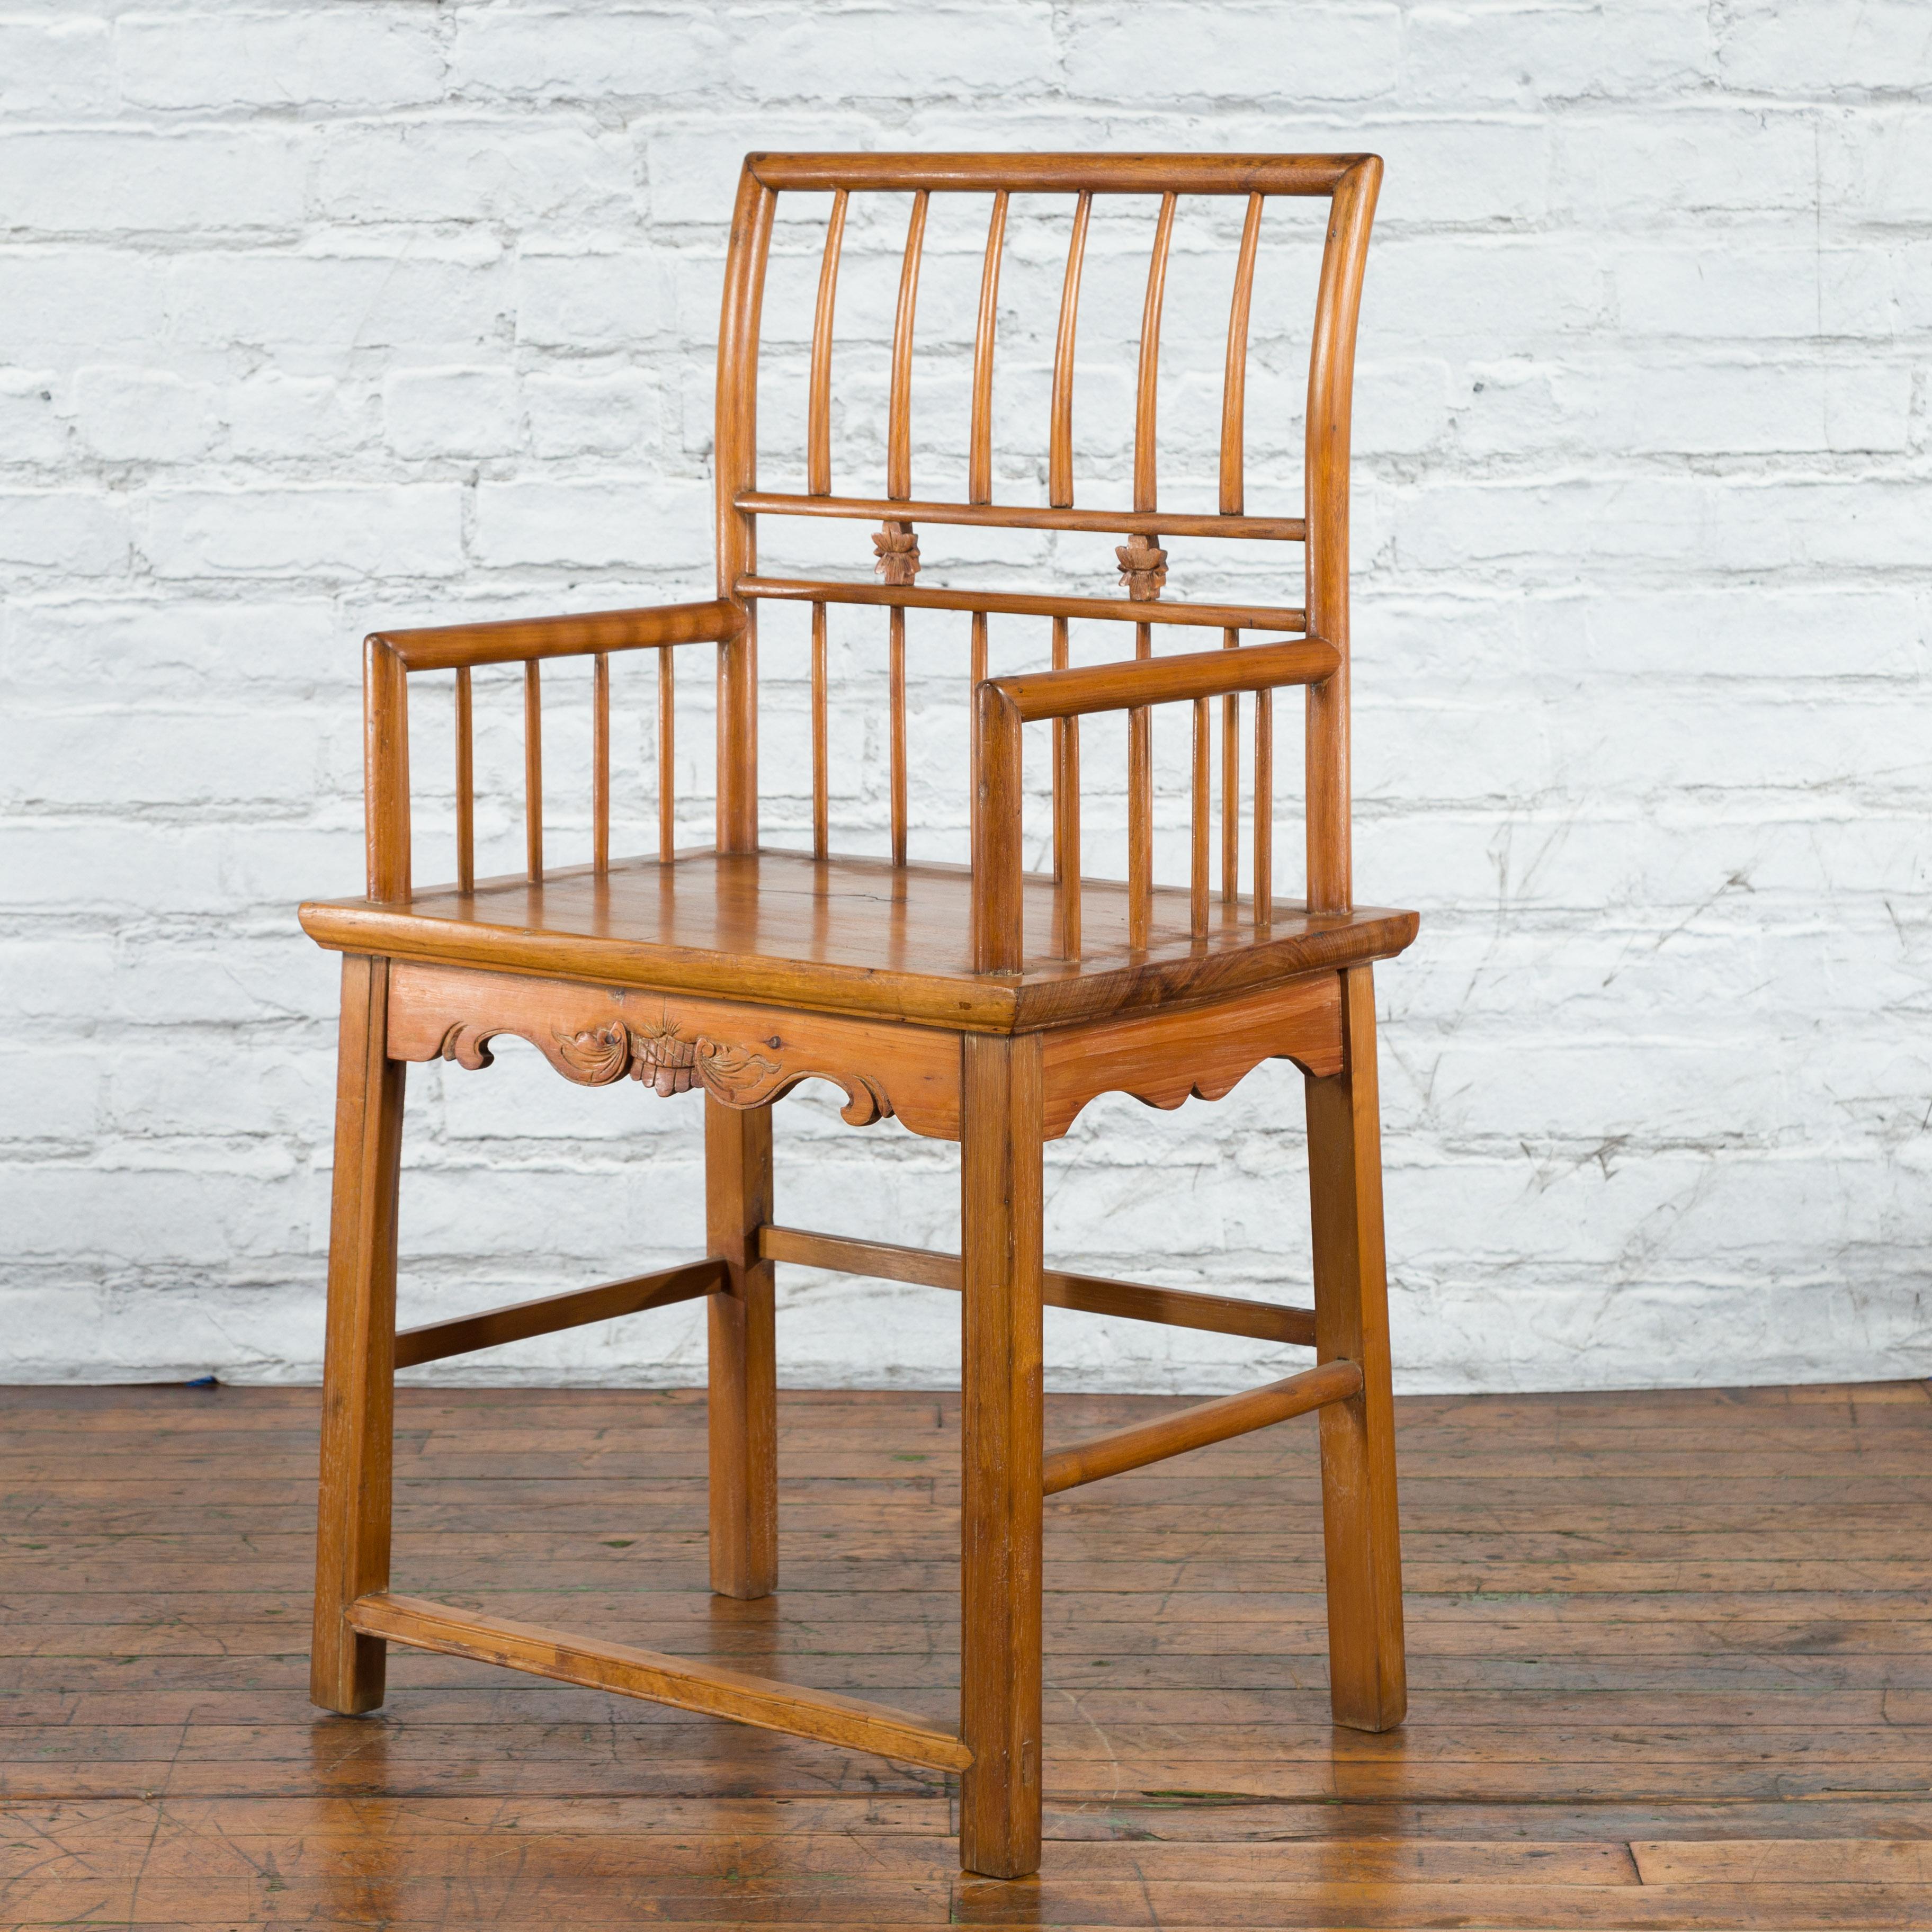 A Chinese Qing Dynasty period elm wood armchair from the 19th century with hand-carved apron and floral motifs. Created in China during the Qing Dynasty in the 19th century, this elm wood armchair features a slightly out-scrolling stick back,